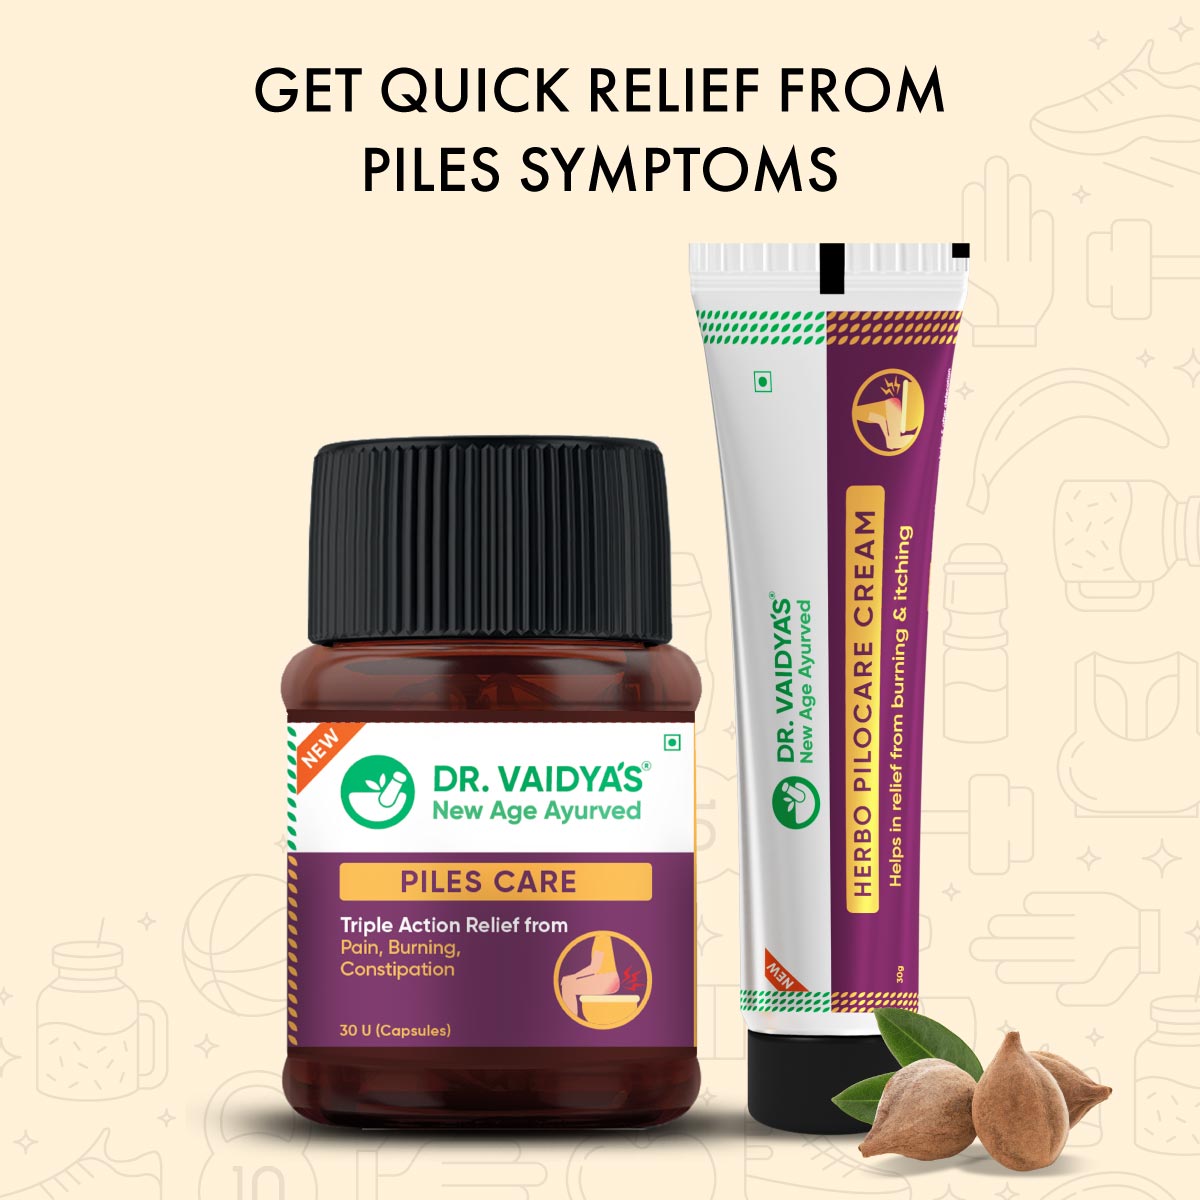 Piles Cream Care Combo: For Managing Piles Naturally